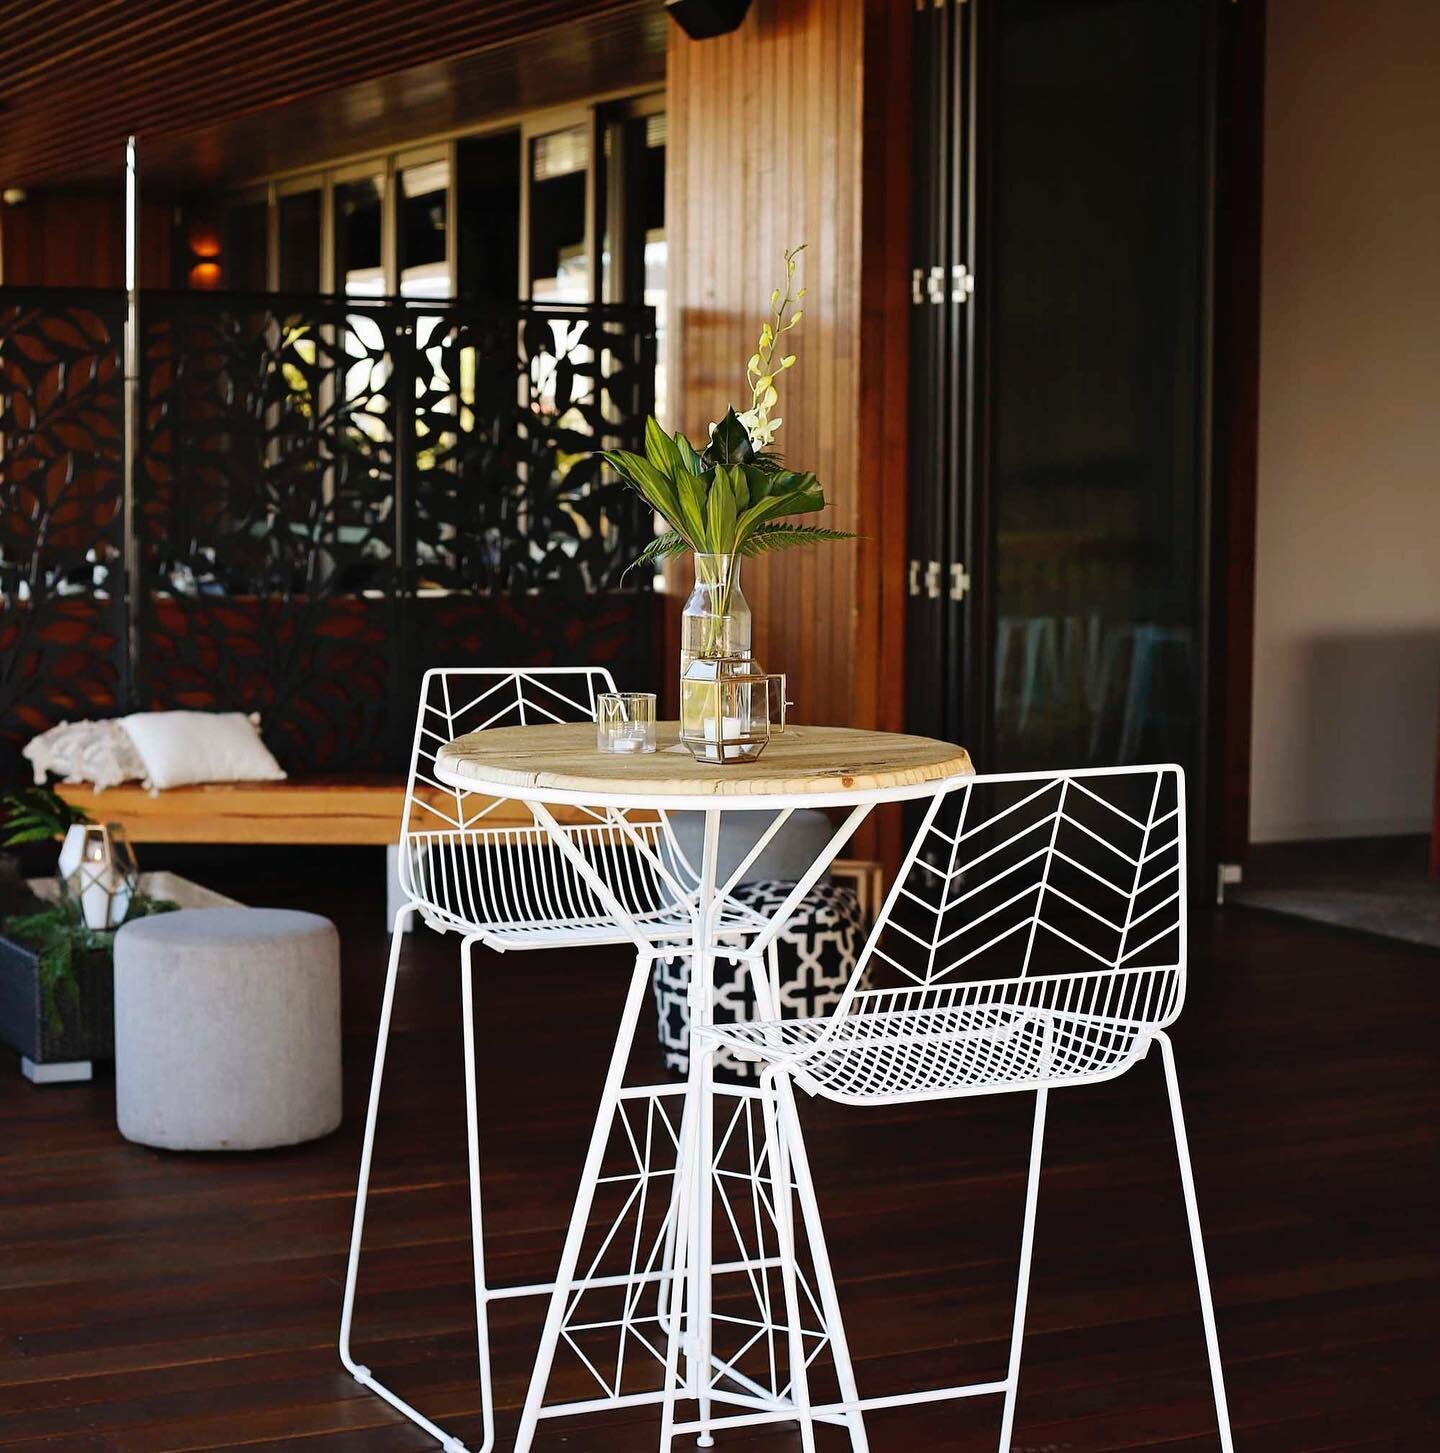 HAMPTON PALLET BARS
These are super cute 🥰

We currently have five of these available 👌

These are perfect for a more glam event and these tables come with two white wire stools per table
.
.
.
#furniturehireperth #hyrecollective #weddingfurniturep